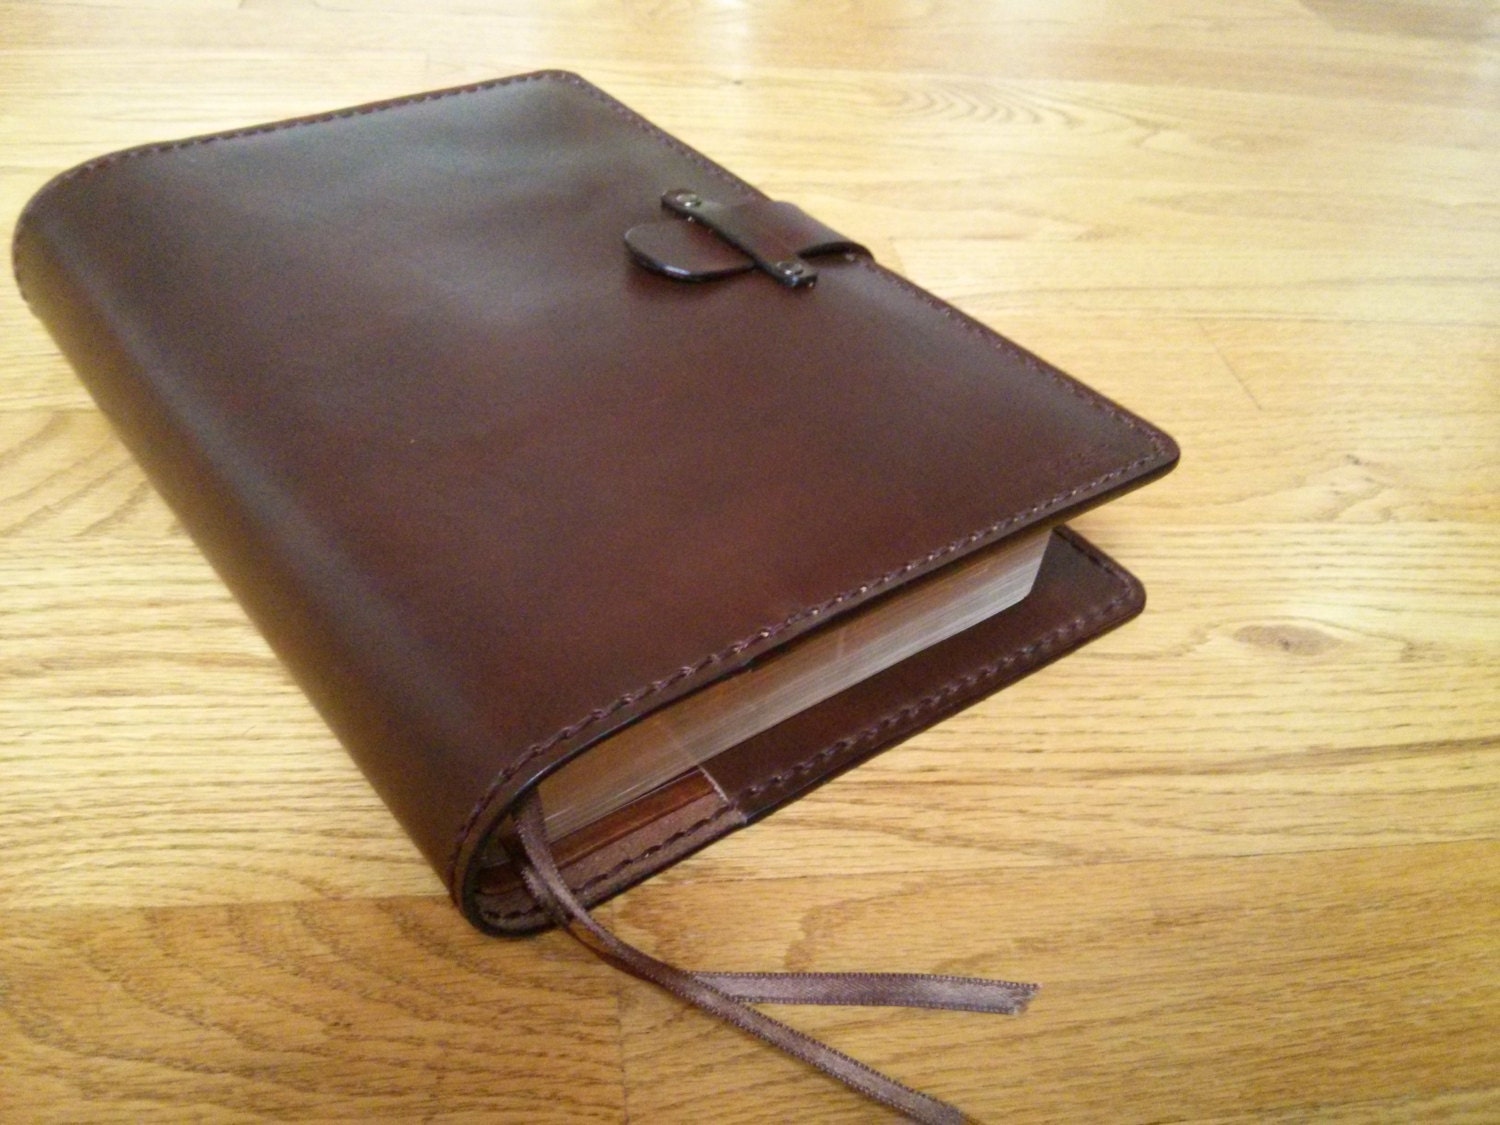 Handmade Custom Sized Leather Bible Cover in Dark Brown Made